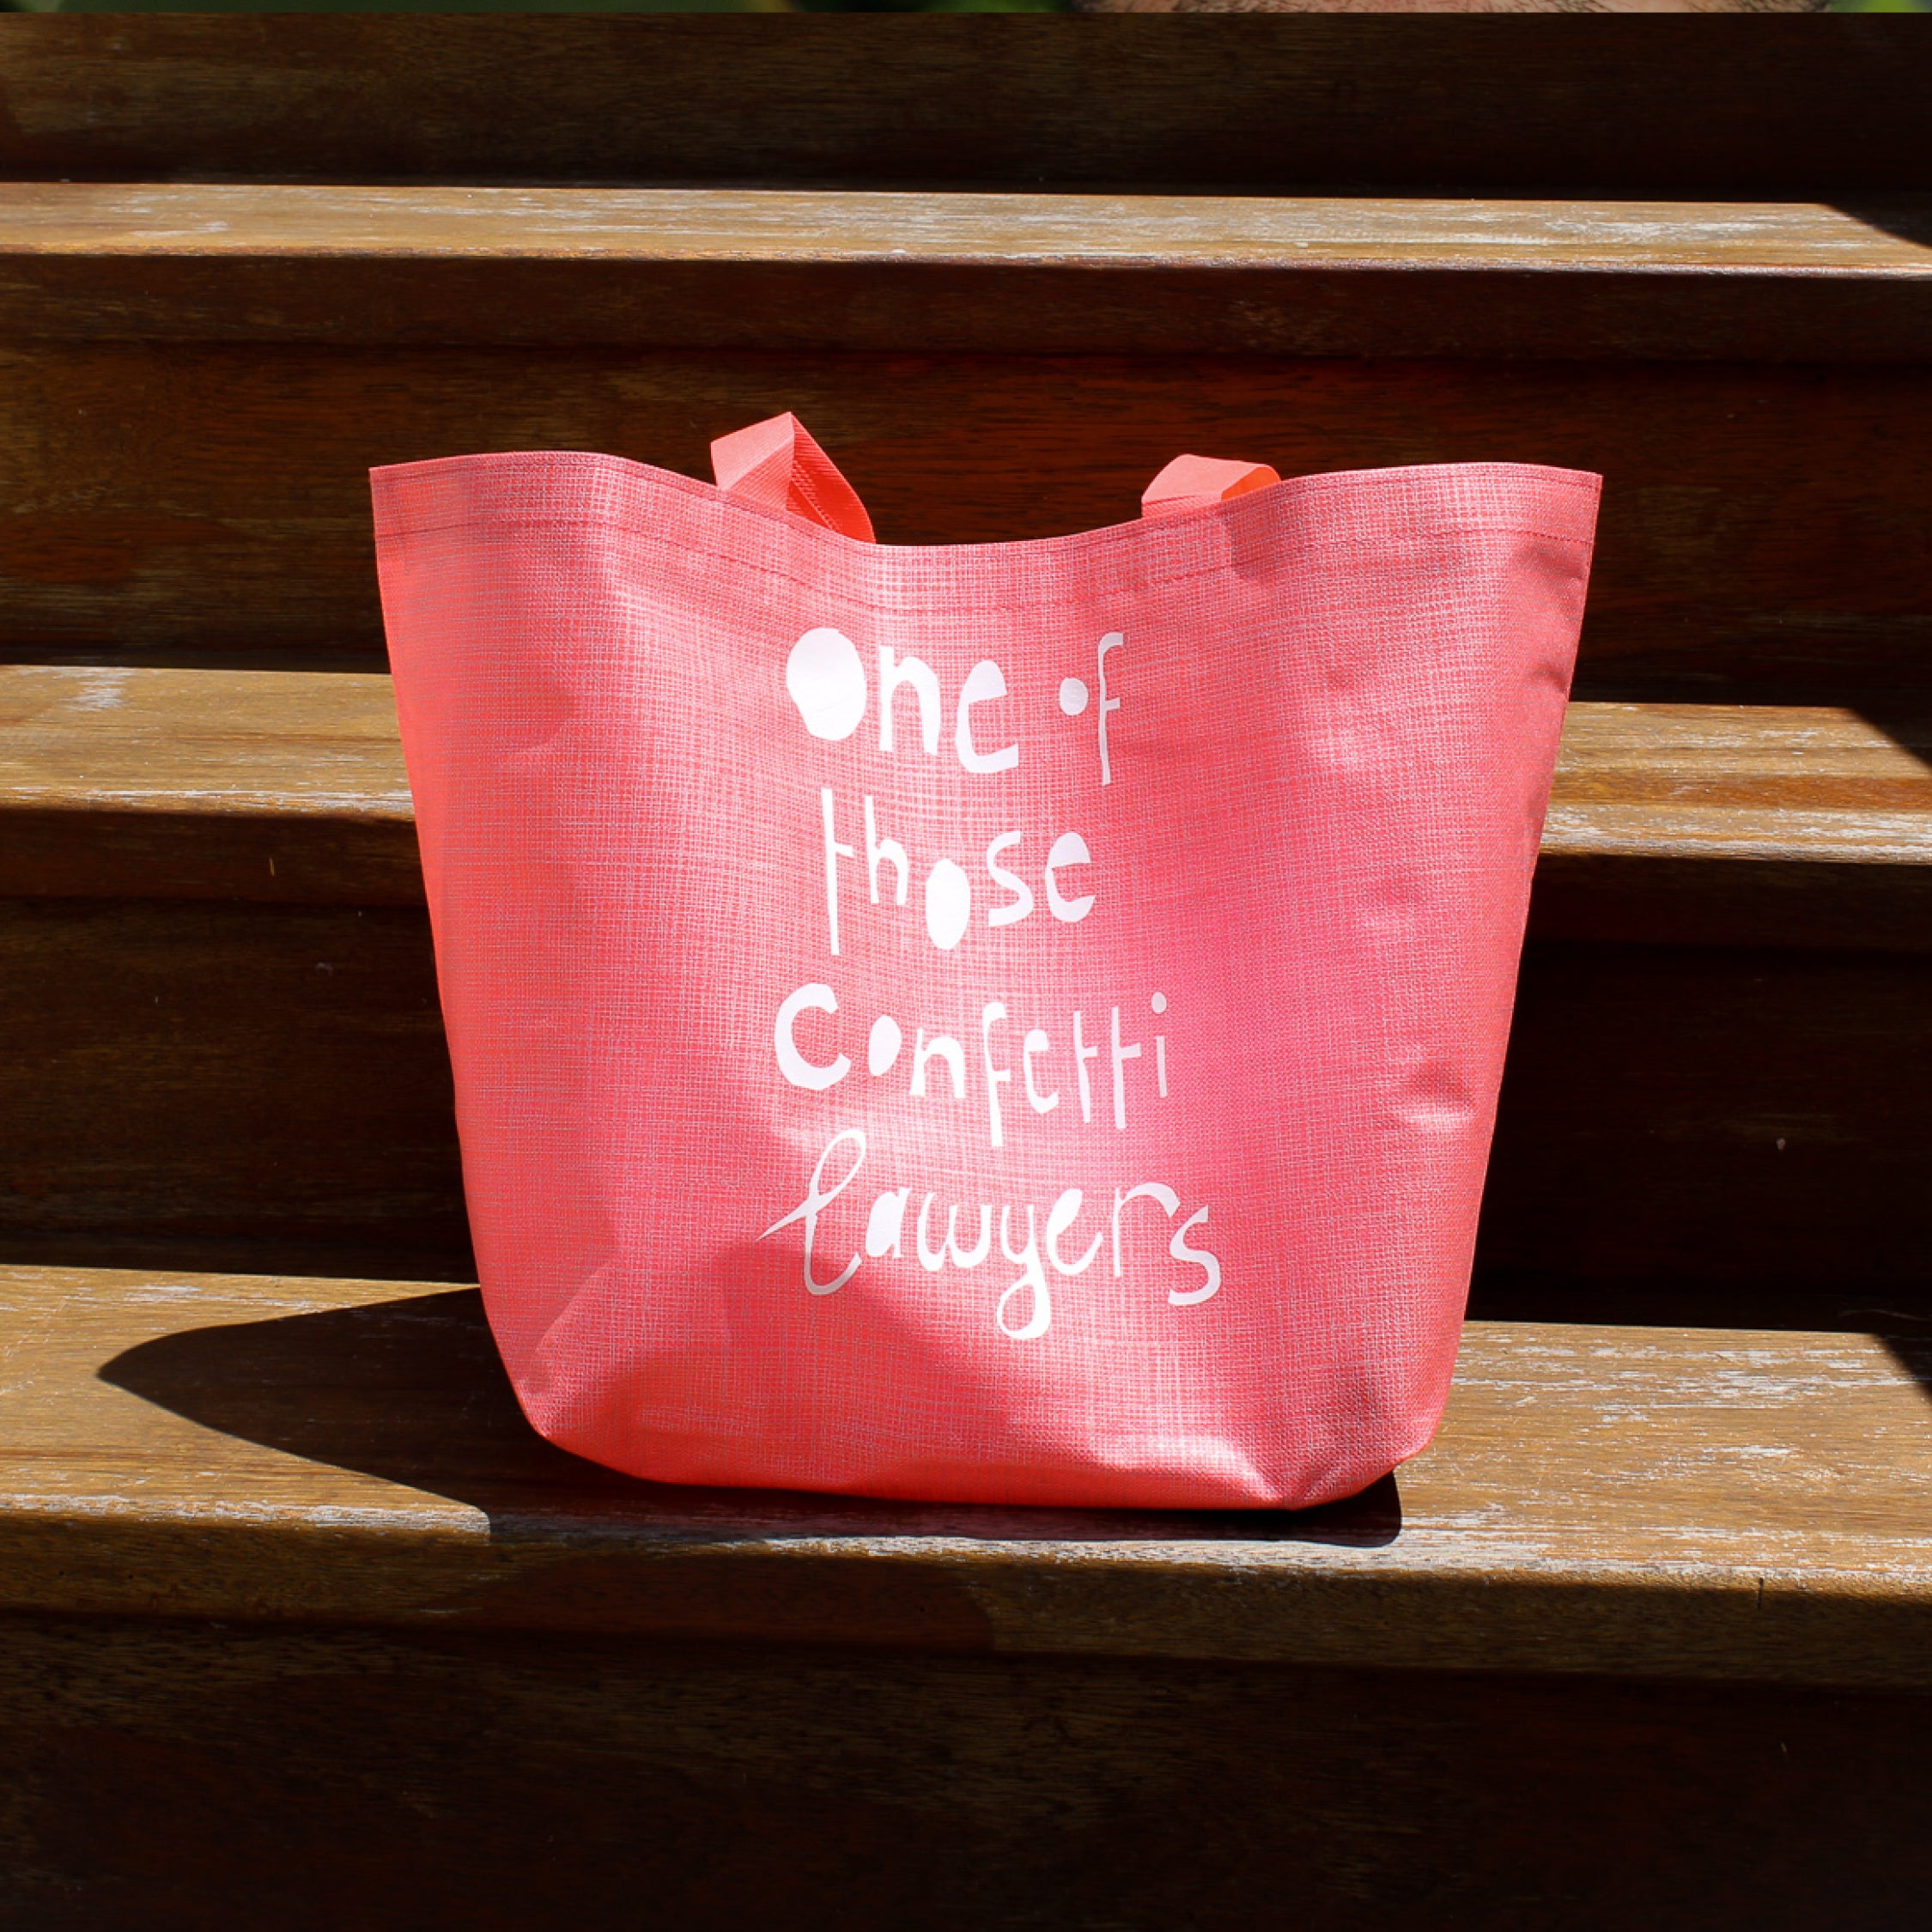 One of those 'confetti lawyers' shopping tote bags!